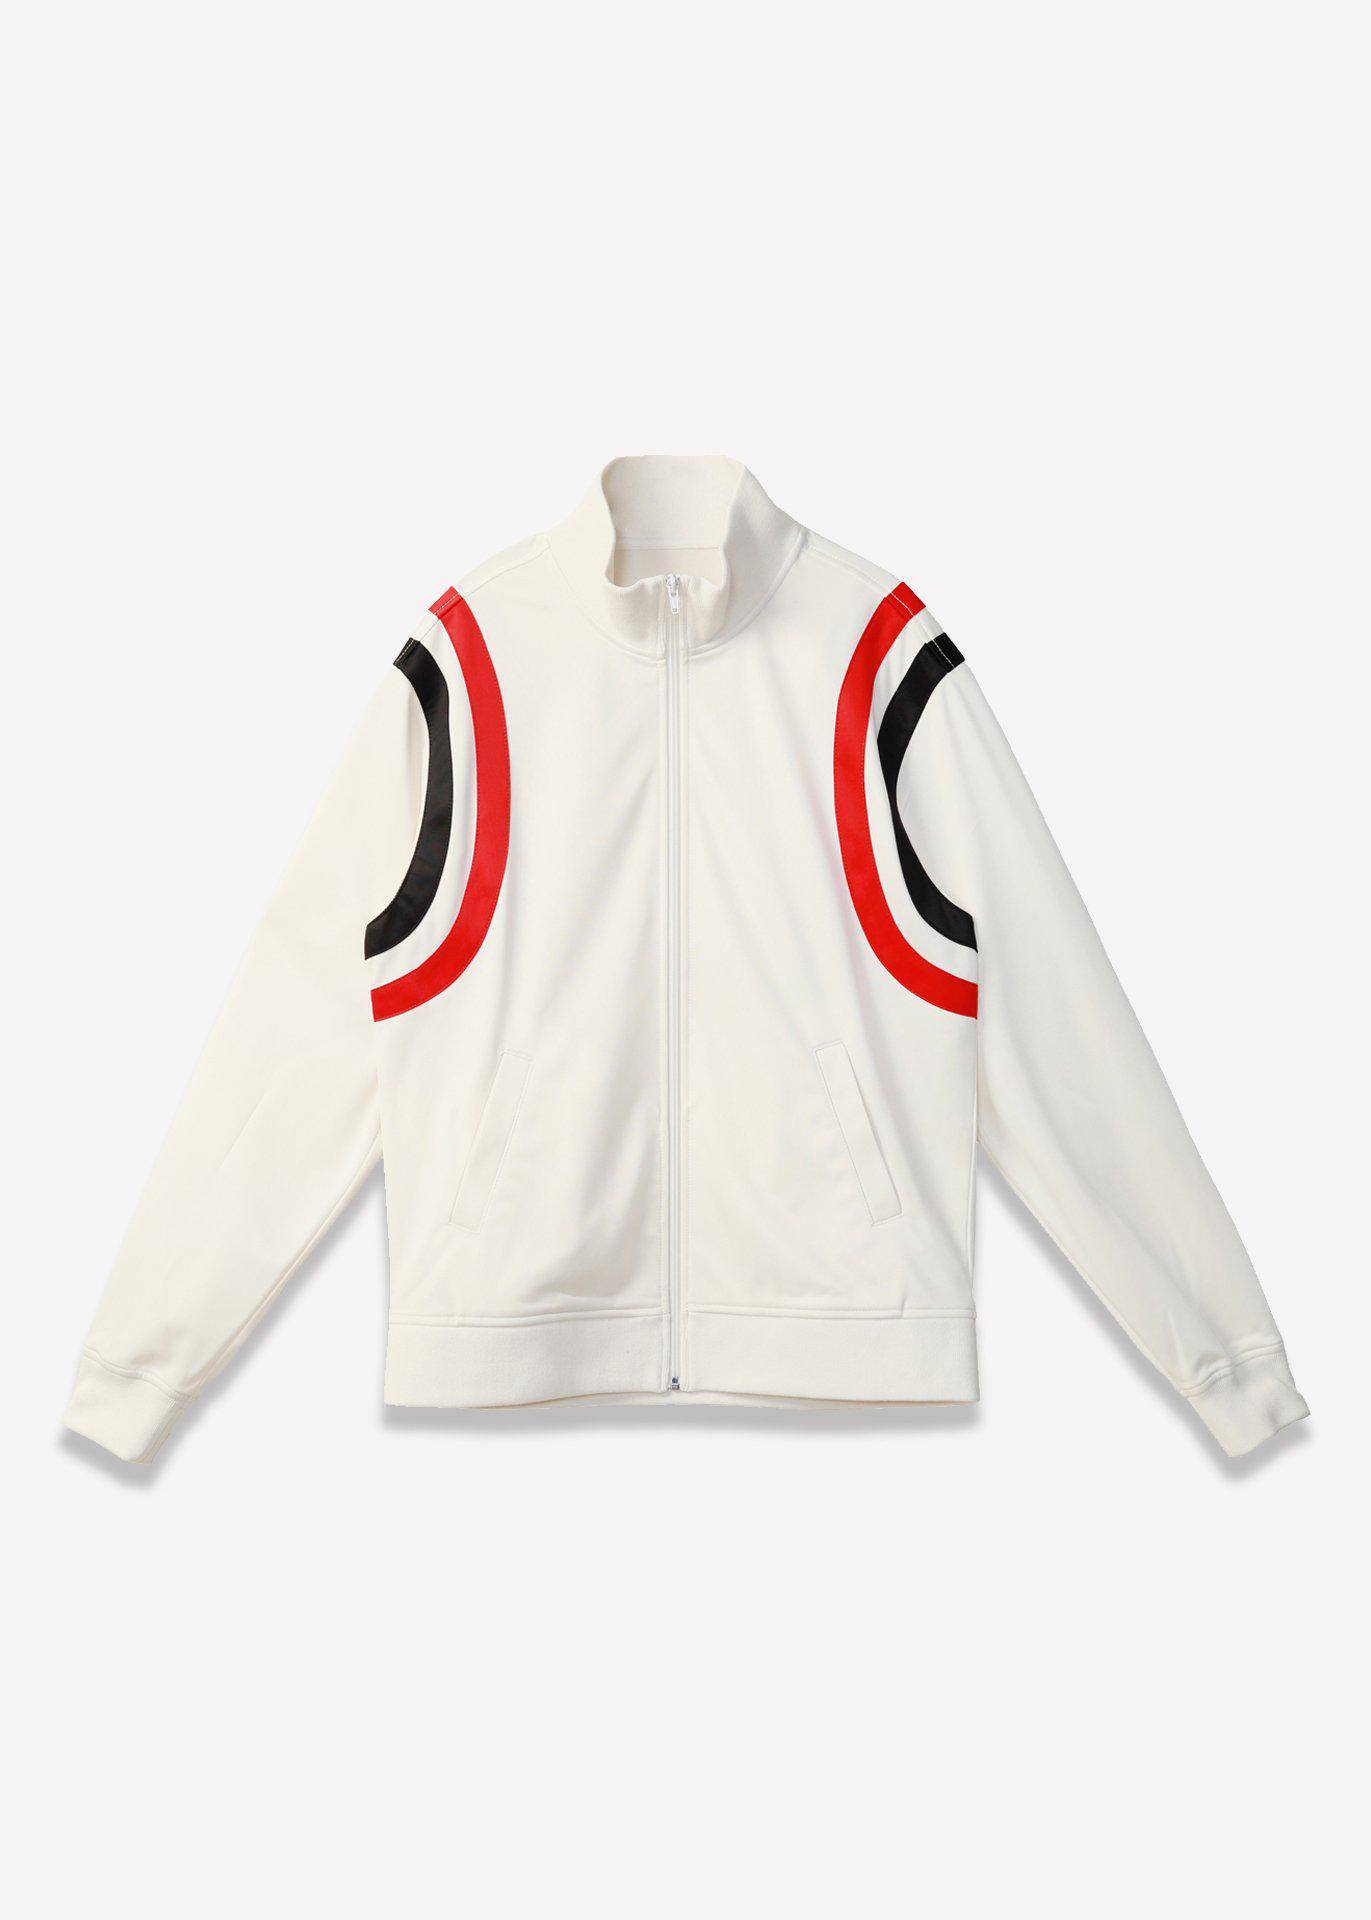 Blank State Men's Track Jacket in White by Shop at Konus